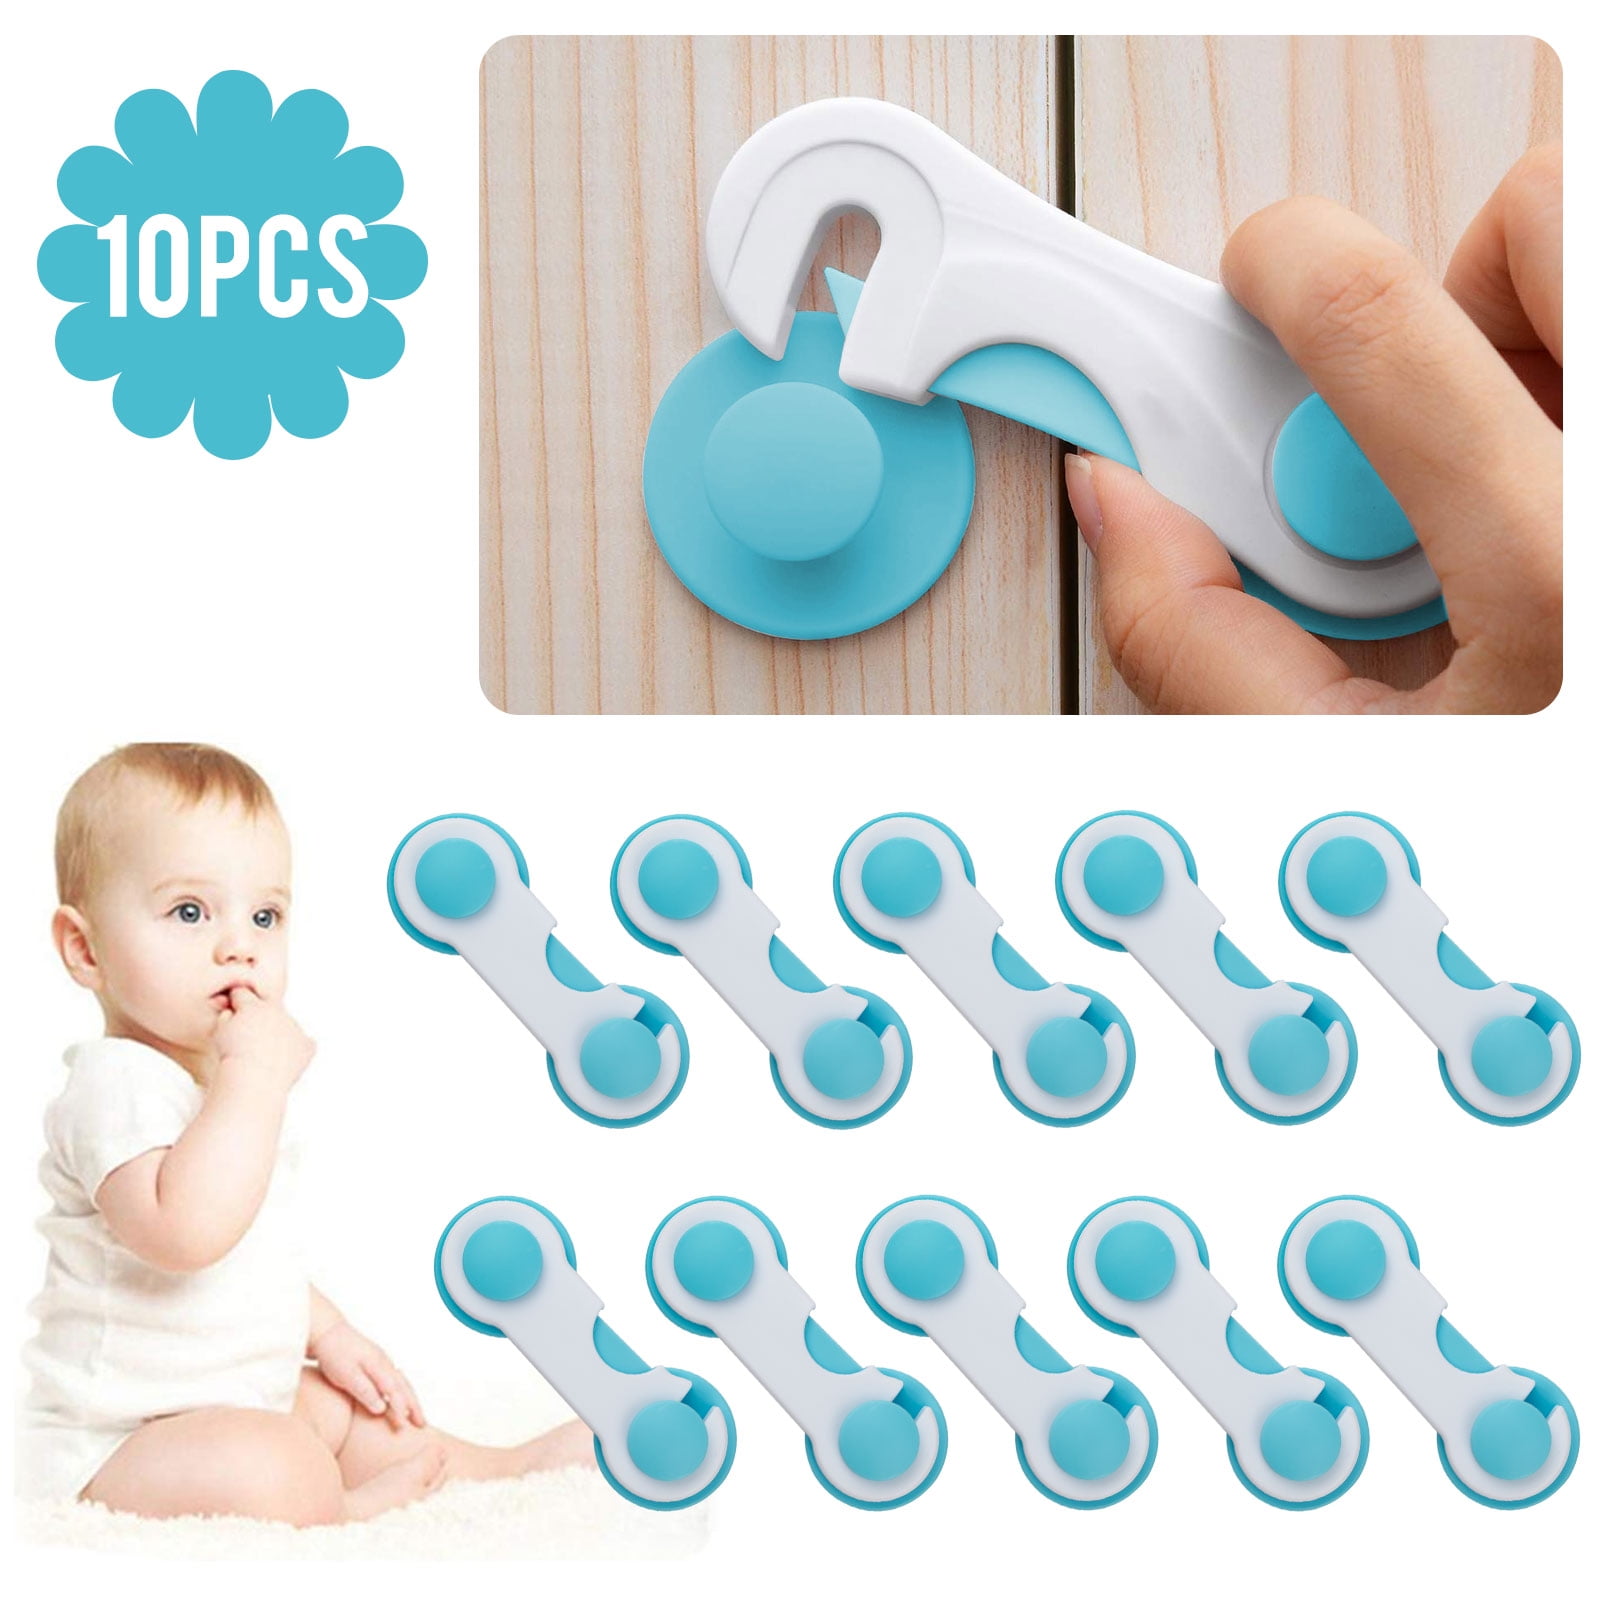  Qunclay 124 Pcs Baby Proofing Kit Baby Safety Kit Includes 24  Cabinet Locks with 4 Keys 24 Adjustable Adhesive Safety Latches 24 Corner  Guards 24 Outlet Covers and 24 Door Pinch Protectors, No Drill : Baby